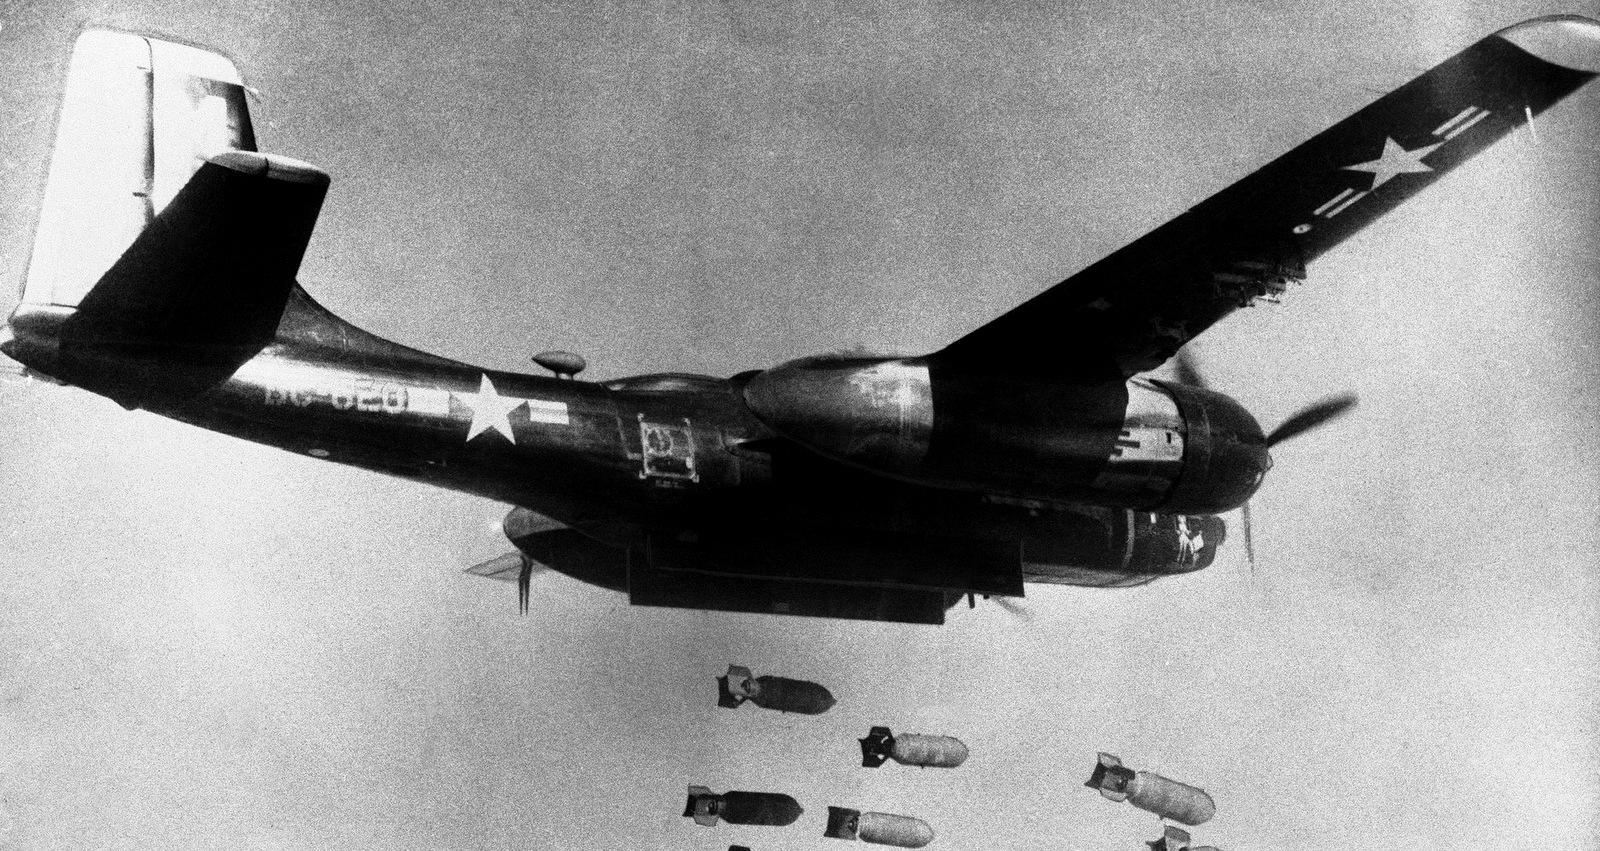 Bombs drop from a U.S. Air Force 3rd bomber wing B26 light bomber somewhere in North Korea. All told, the U.S. dropped 635,000 tons of bombs on Korea during the war, most of it in the North, including with 32,500 tons of napalm, March 18, 1953. (U.S. Air Force via AP)